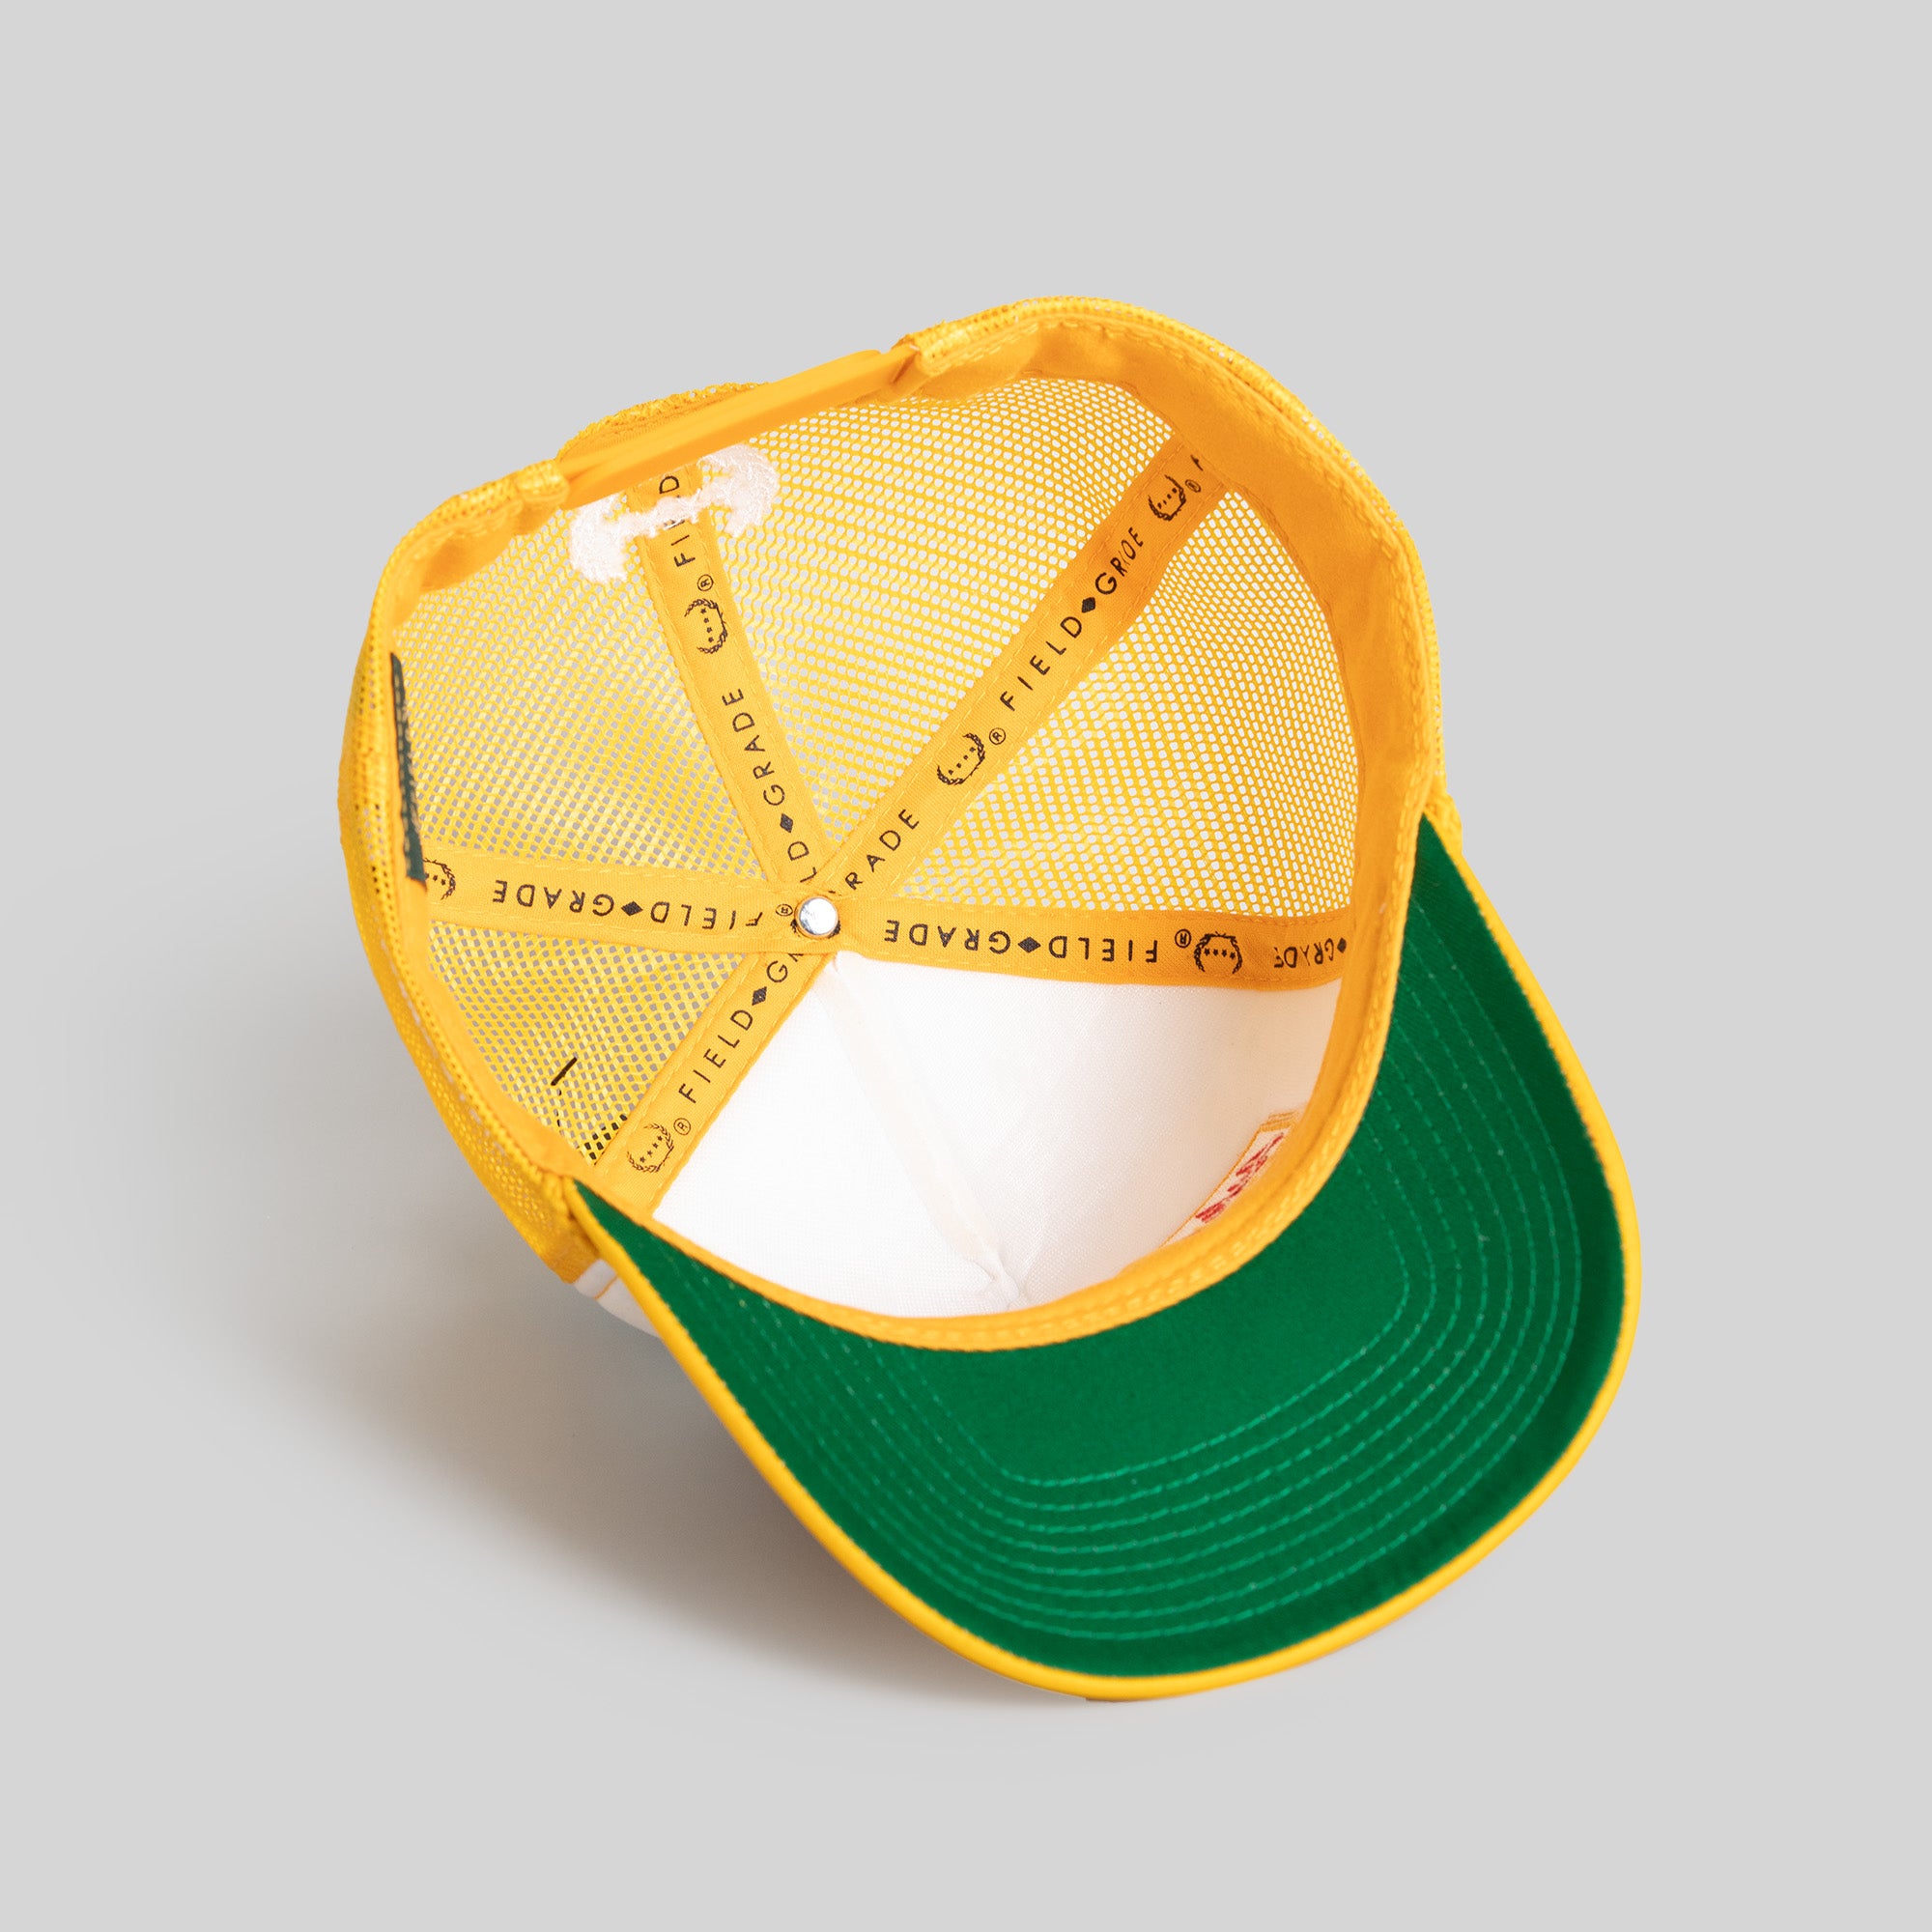 ASK ME WHITE YELLOW GOLD TRUCKER HAT